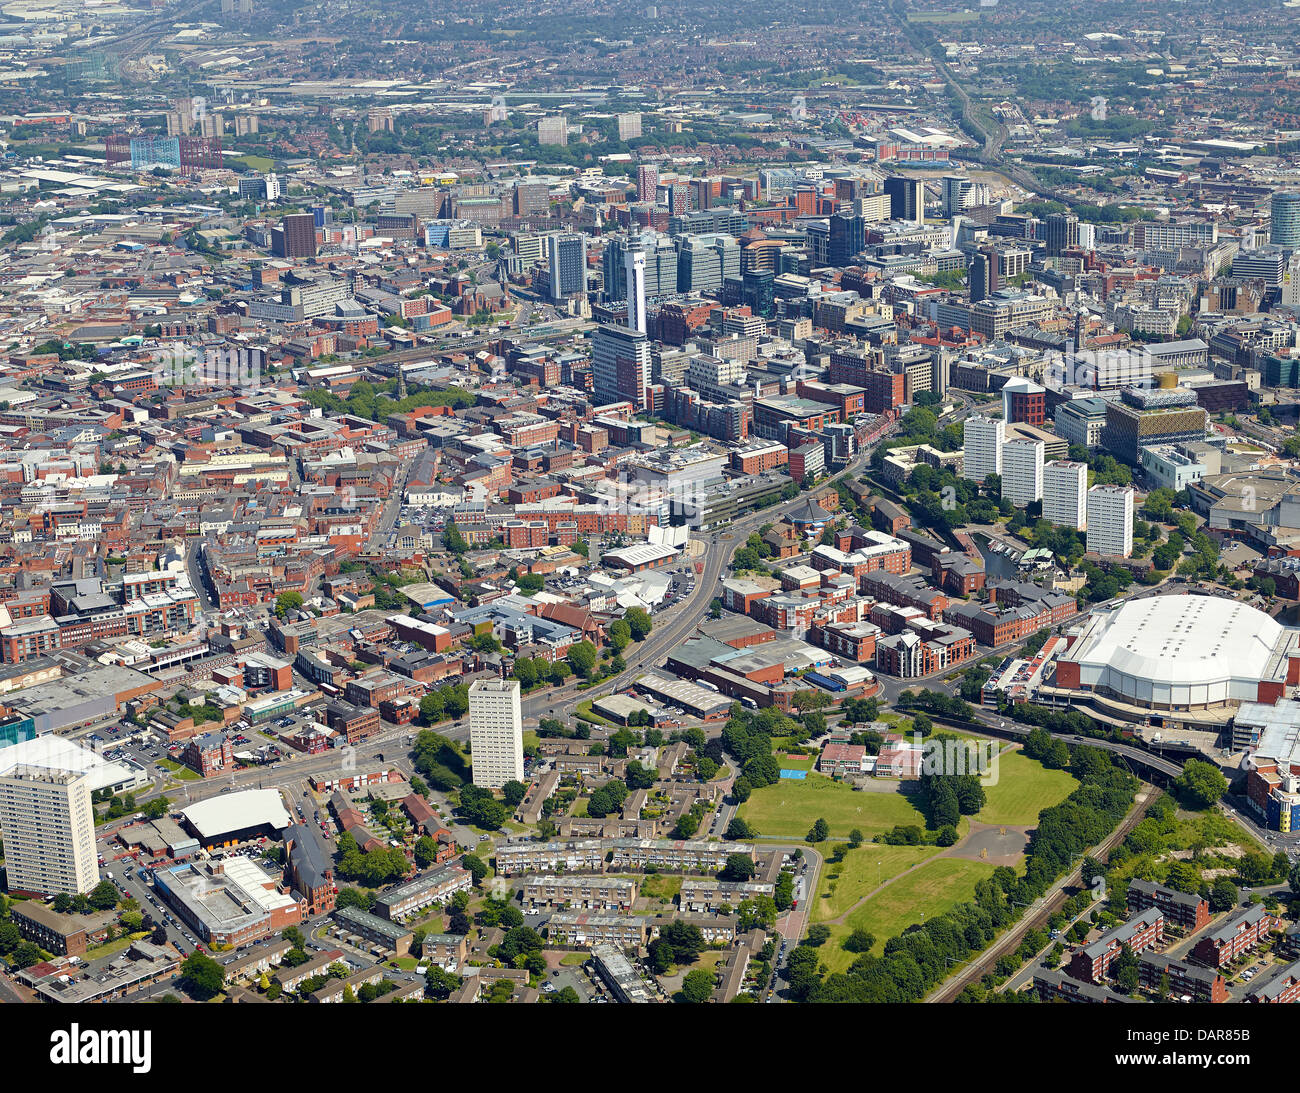 Birmingham City Centre from the air, West Midlands, UK Stock Photo